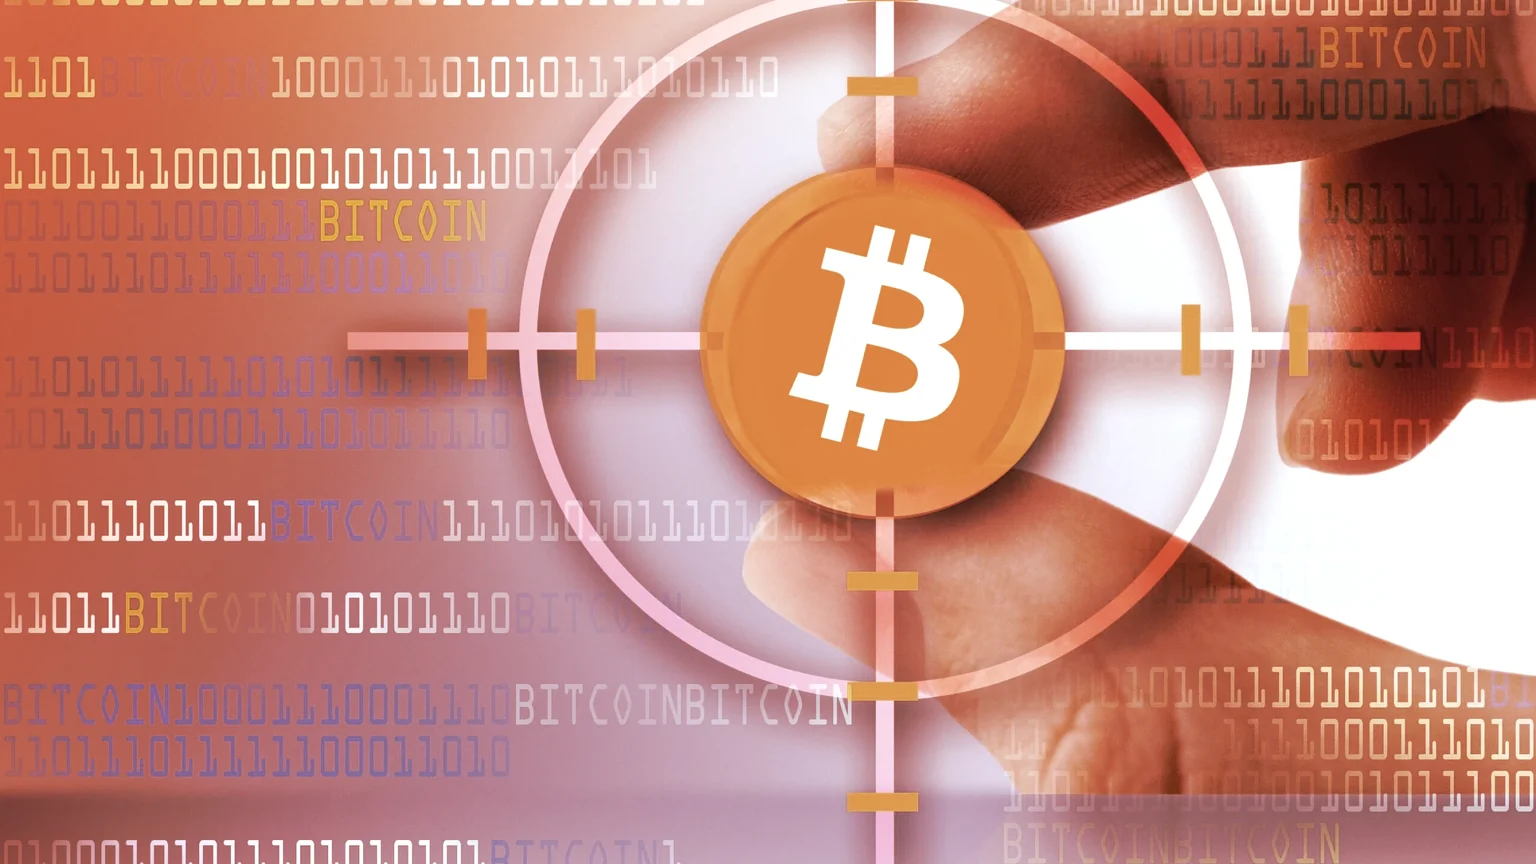 The Bitcoin logo consists of a tilted B against an orange background. Image: Shuttertstock.